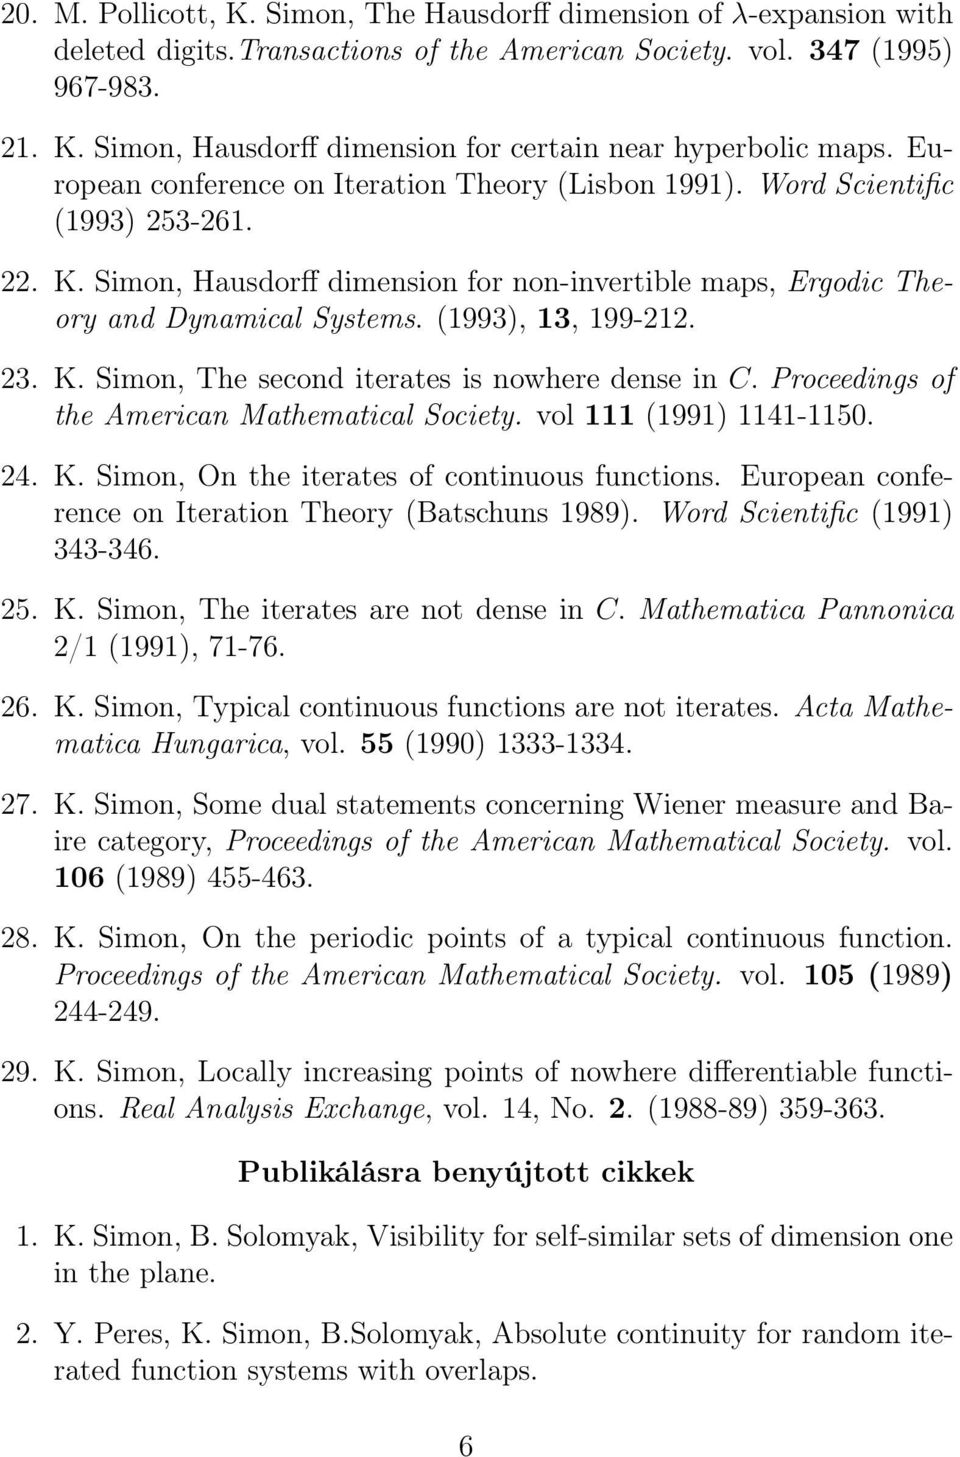 (1993), 13, 199-212. 23. K. Simon, The second iterates is nowhere dense in C. Proceedings of the American Mathematical Society. vol 111 (1991) 1141-1150. 24. K. Simon, On the iterates of continuous functions.